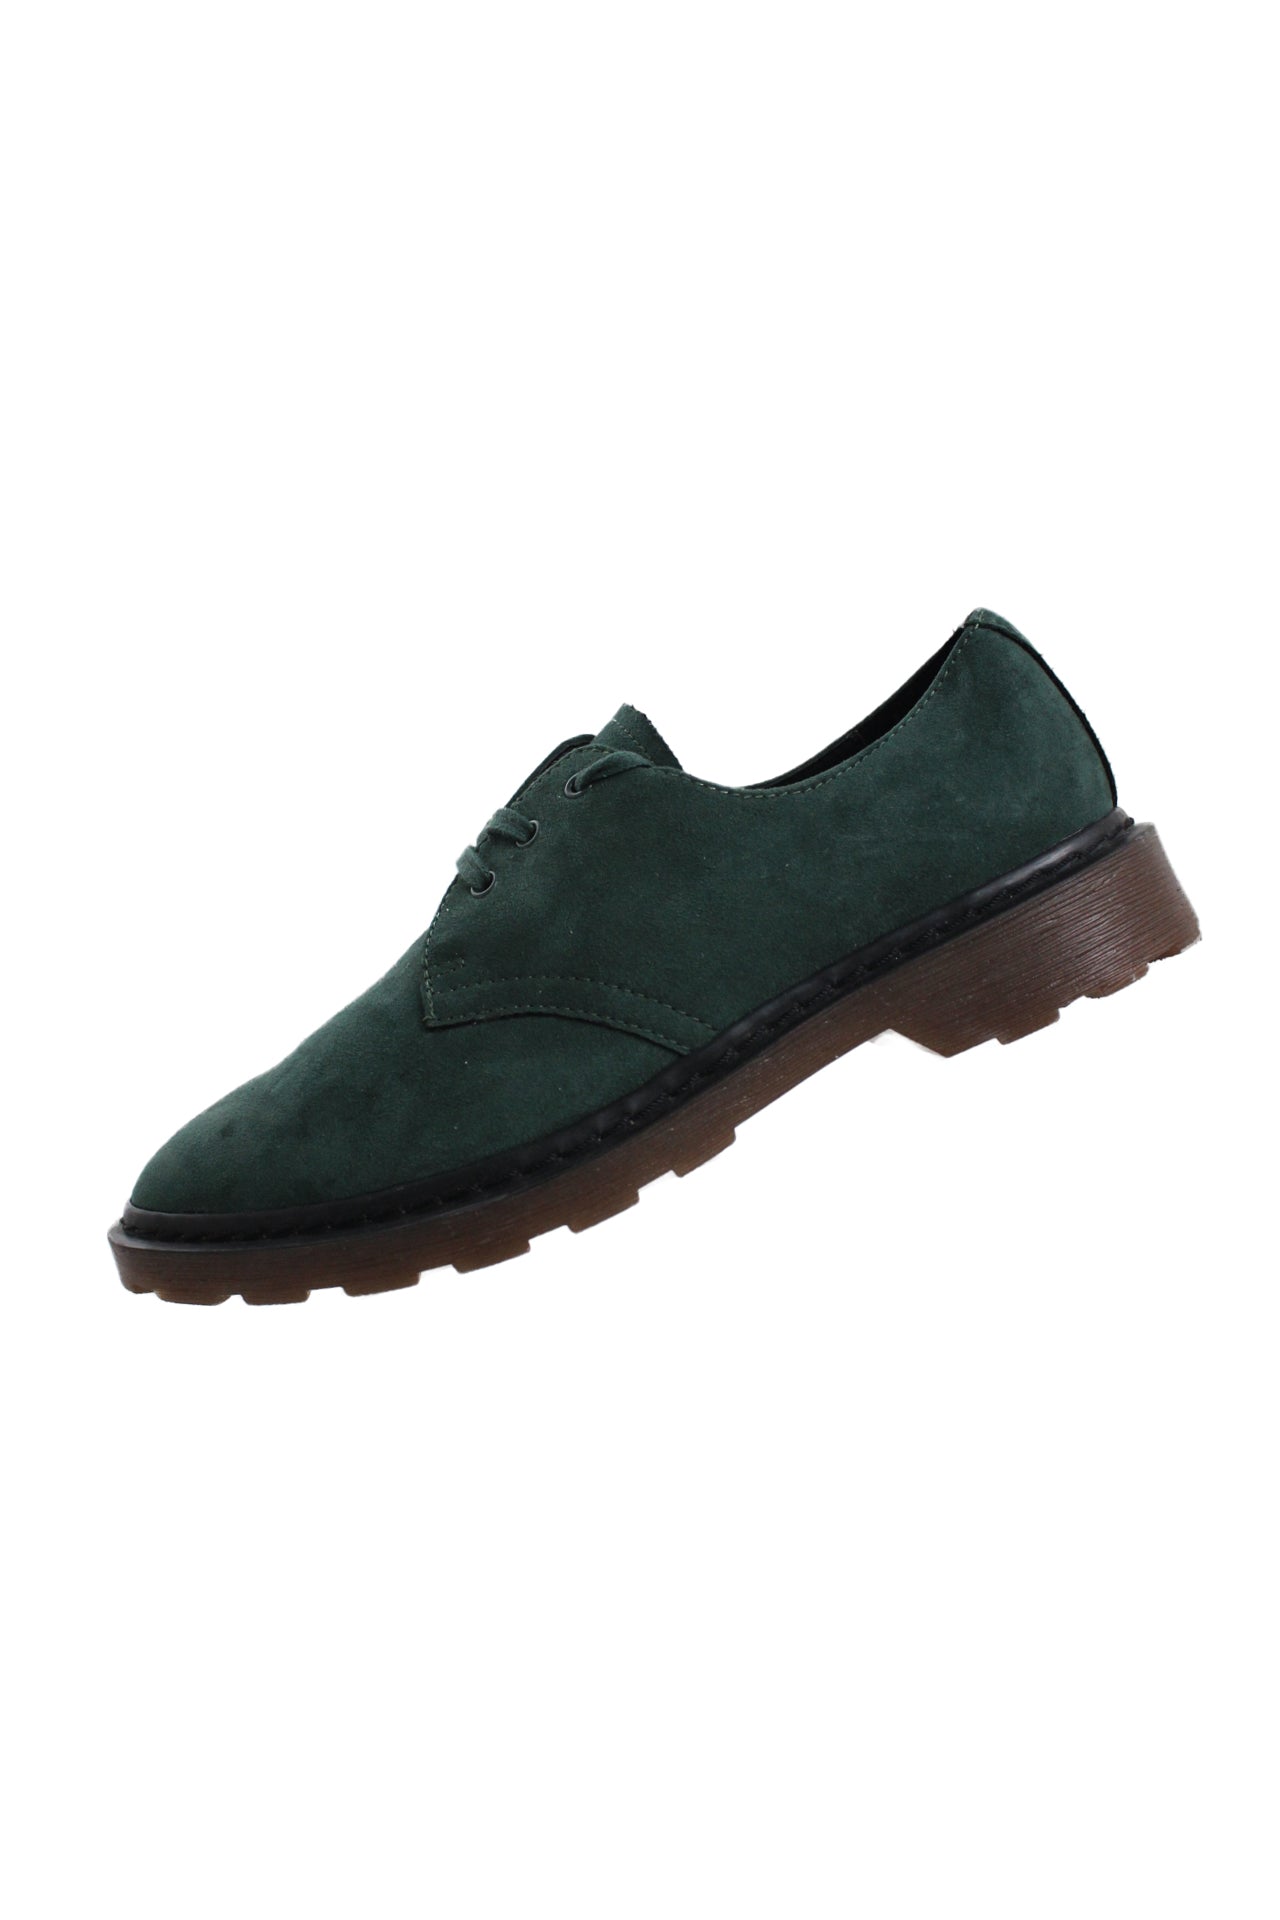 side angle of i.n.c. international concepts green faux suede shoes. features lace up closure, rubber lug sole, and rounded toe. 